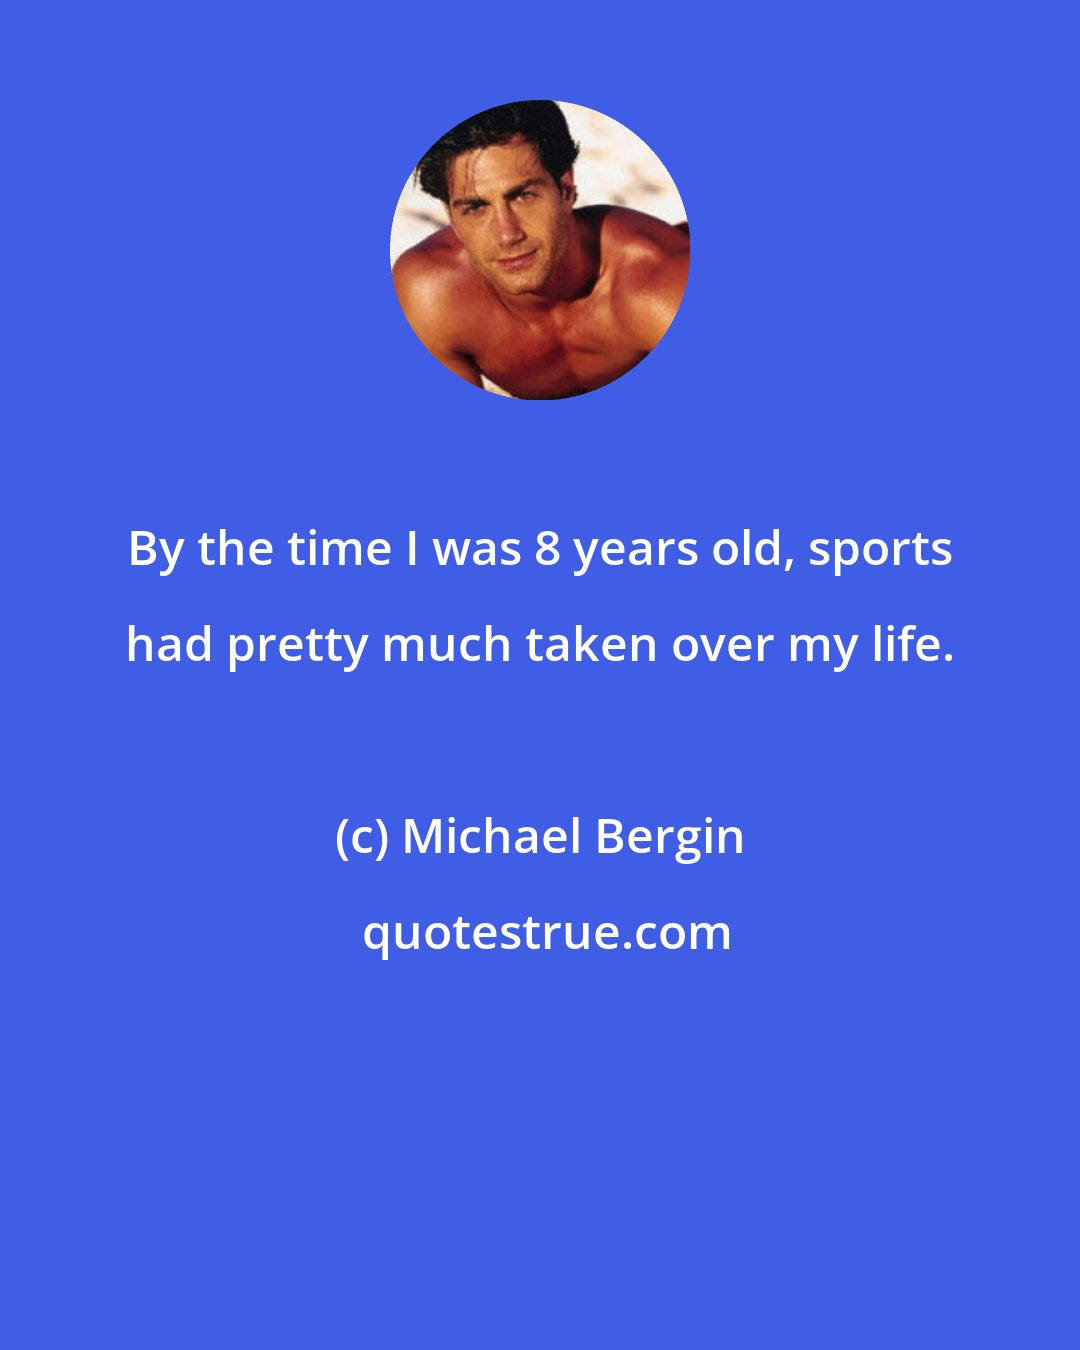 Michael Bergin: By the time I was 8 years old, sports had pretty much taken over my life.